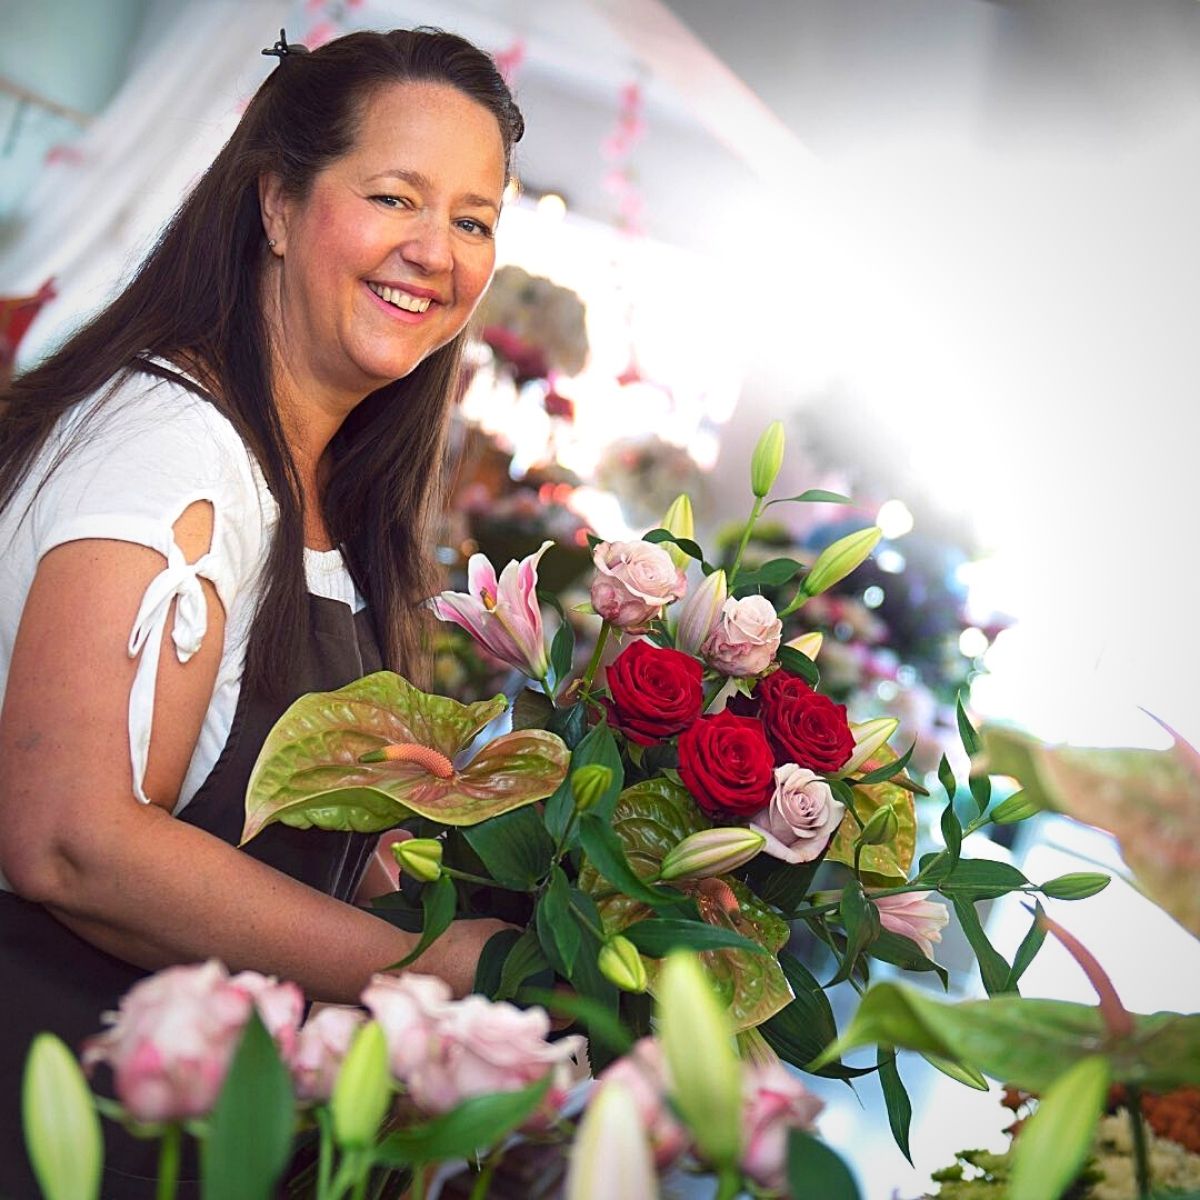 U.K's National Florist Day Honors the Beauty of the Floral Industry